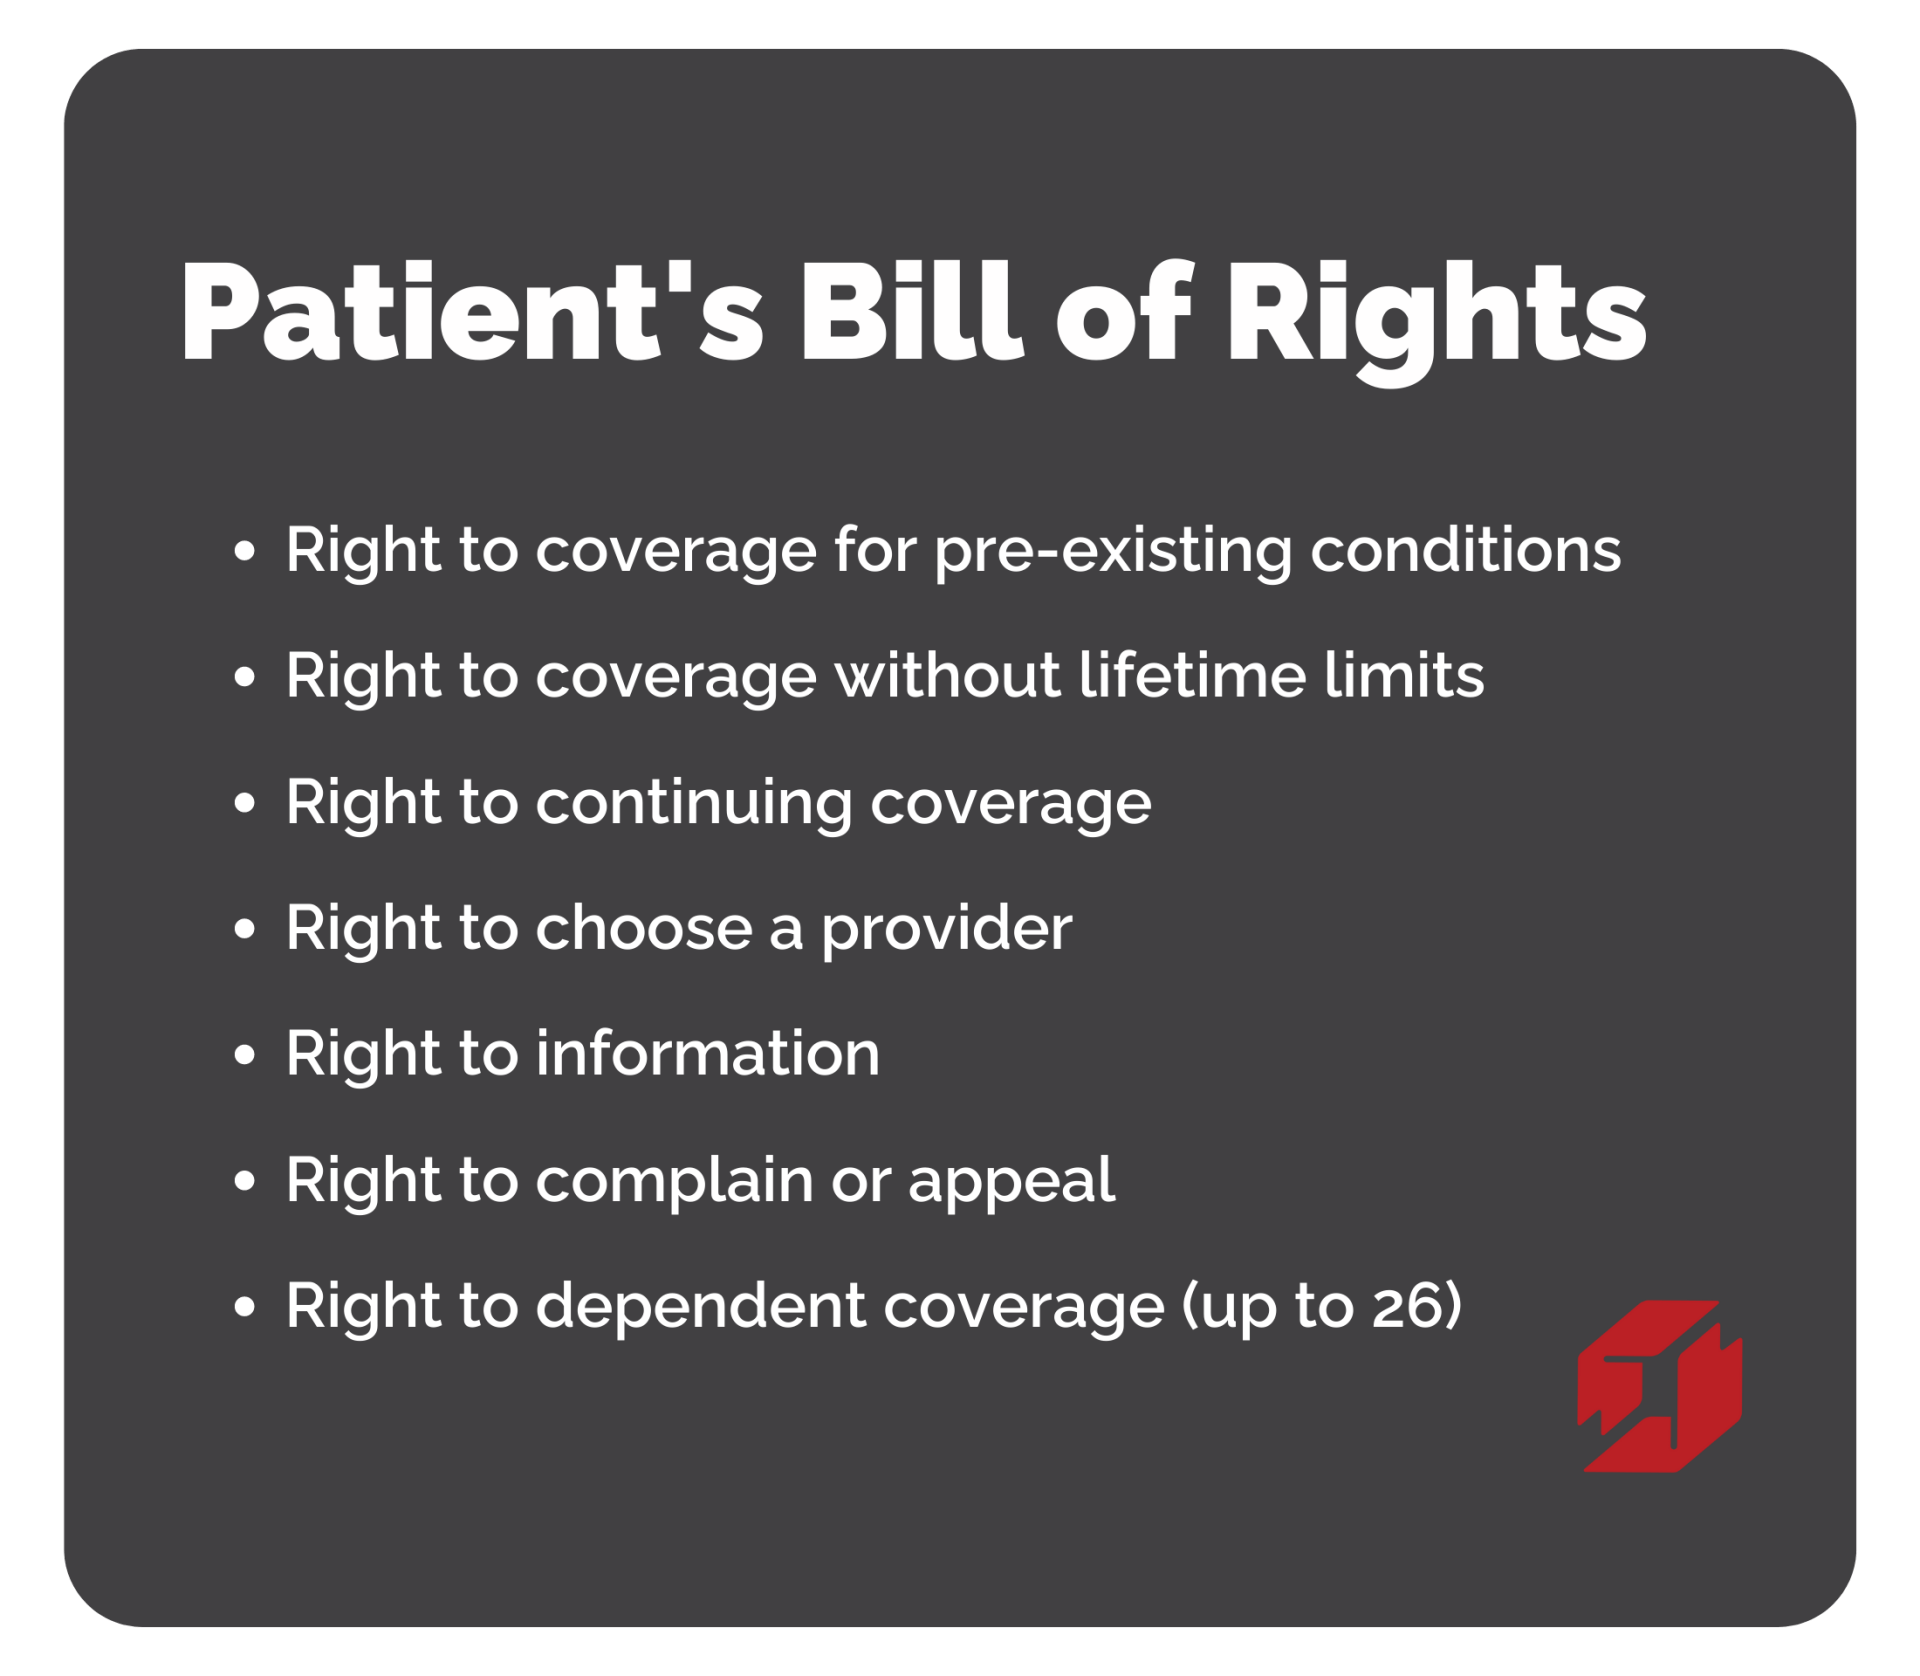 a poster explaining the patient 's bill of rights